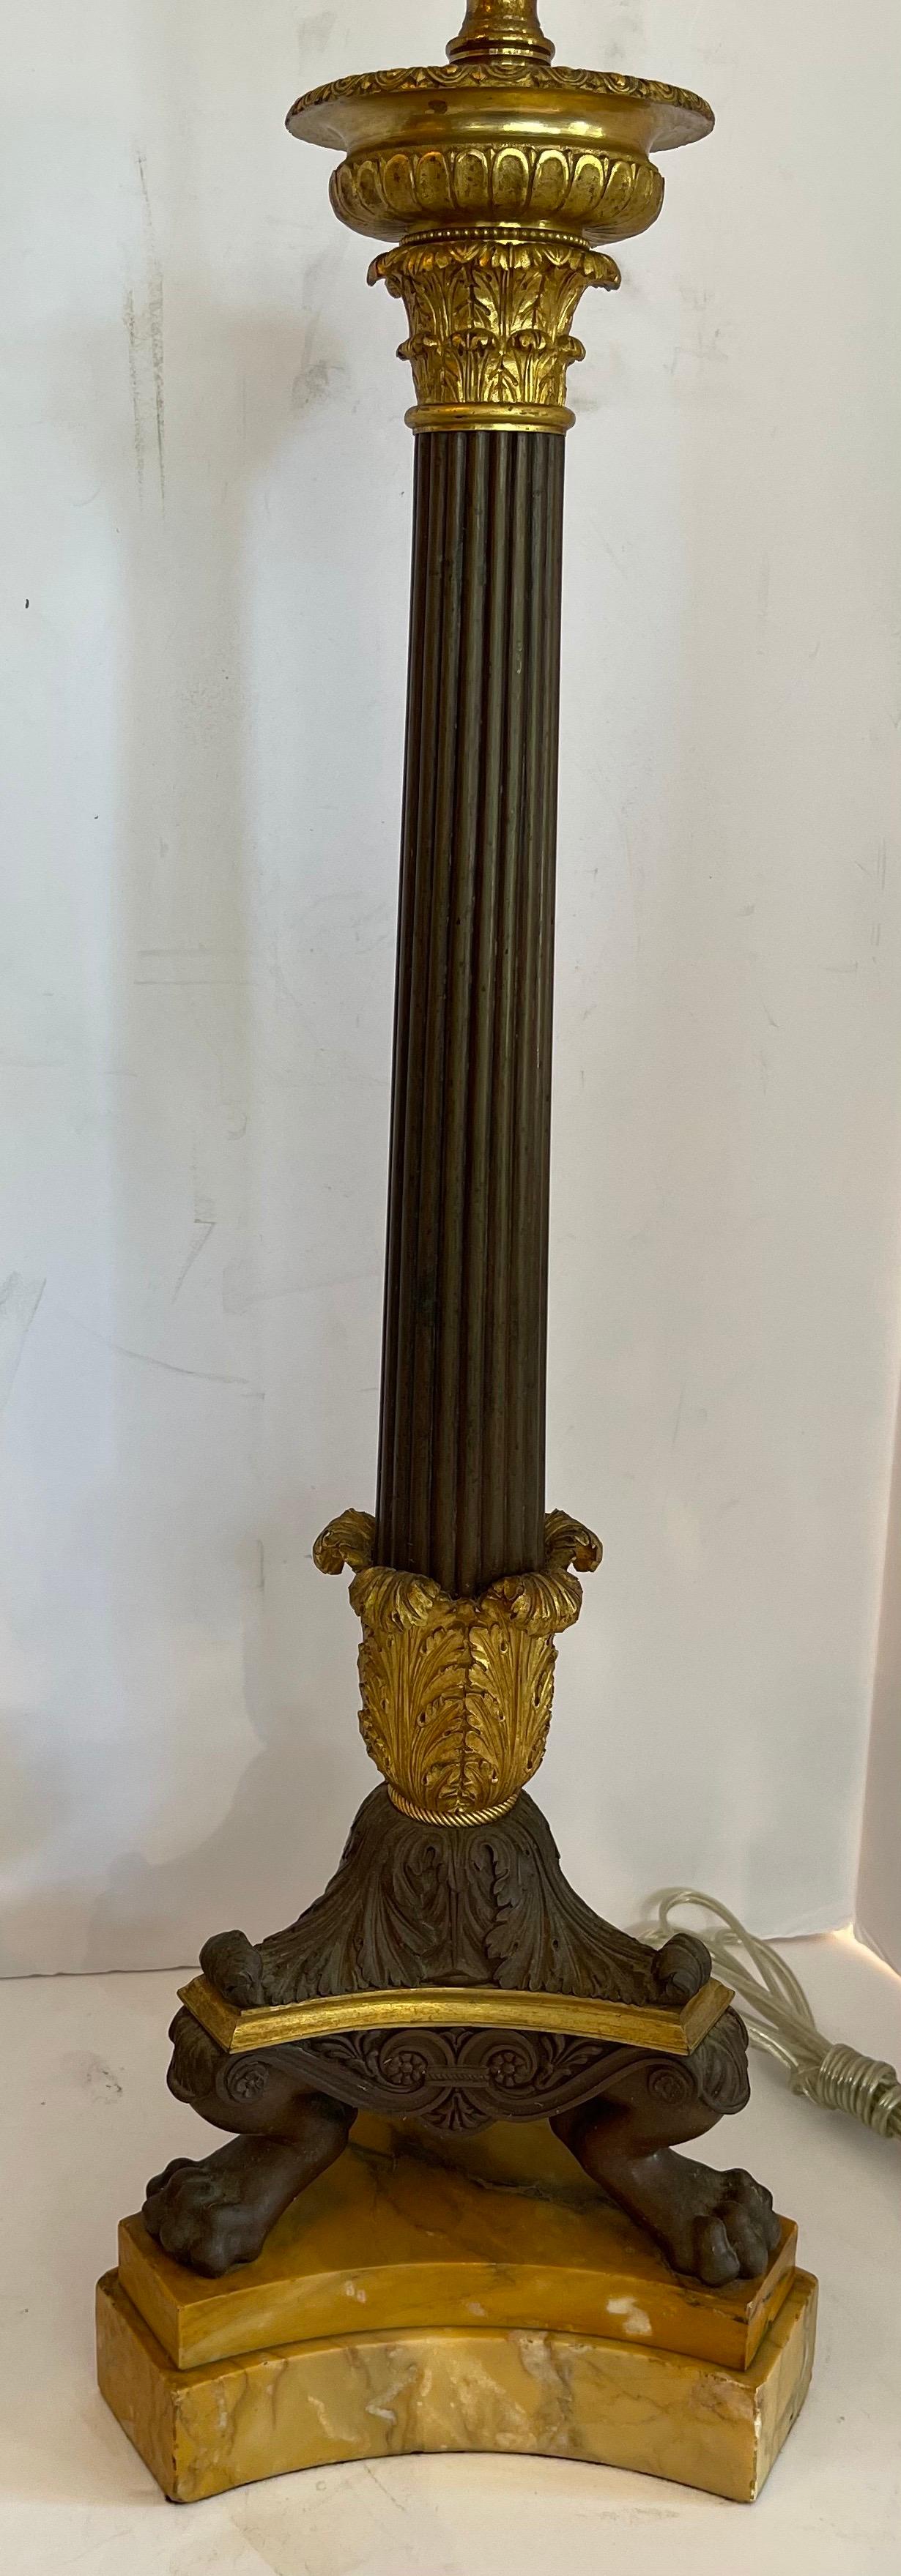 Gilt Fine French Empire Neoclassical Patinated Dore Bronze Marble Pair Column Lamps